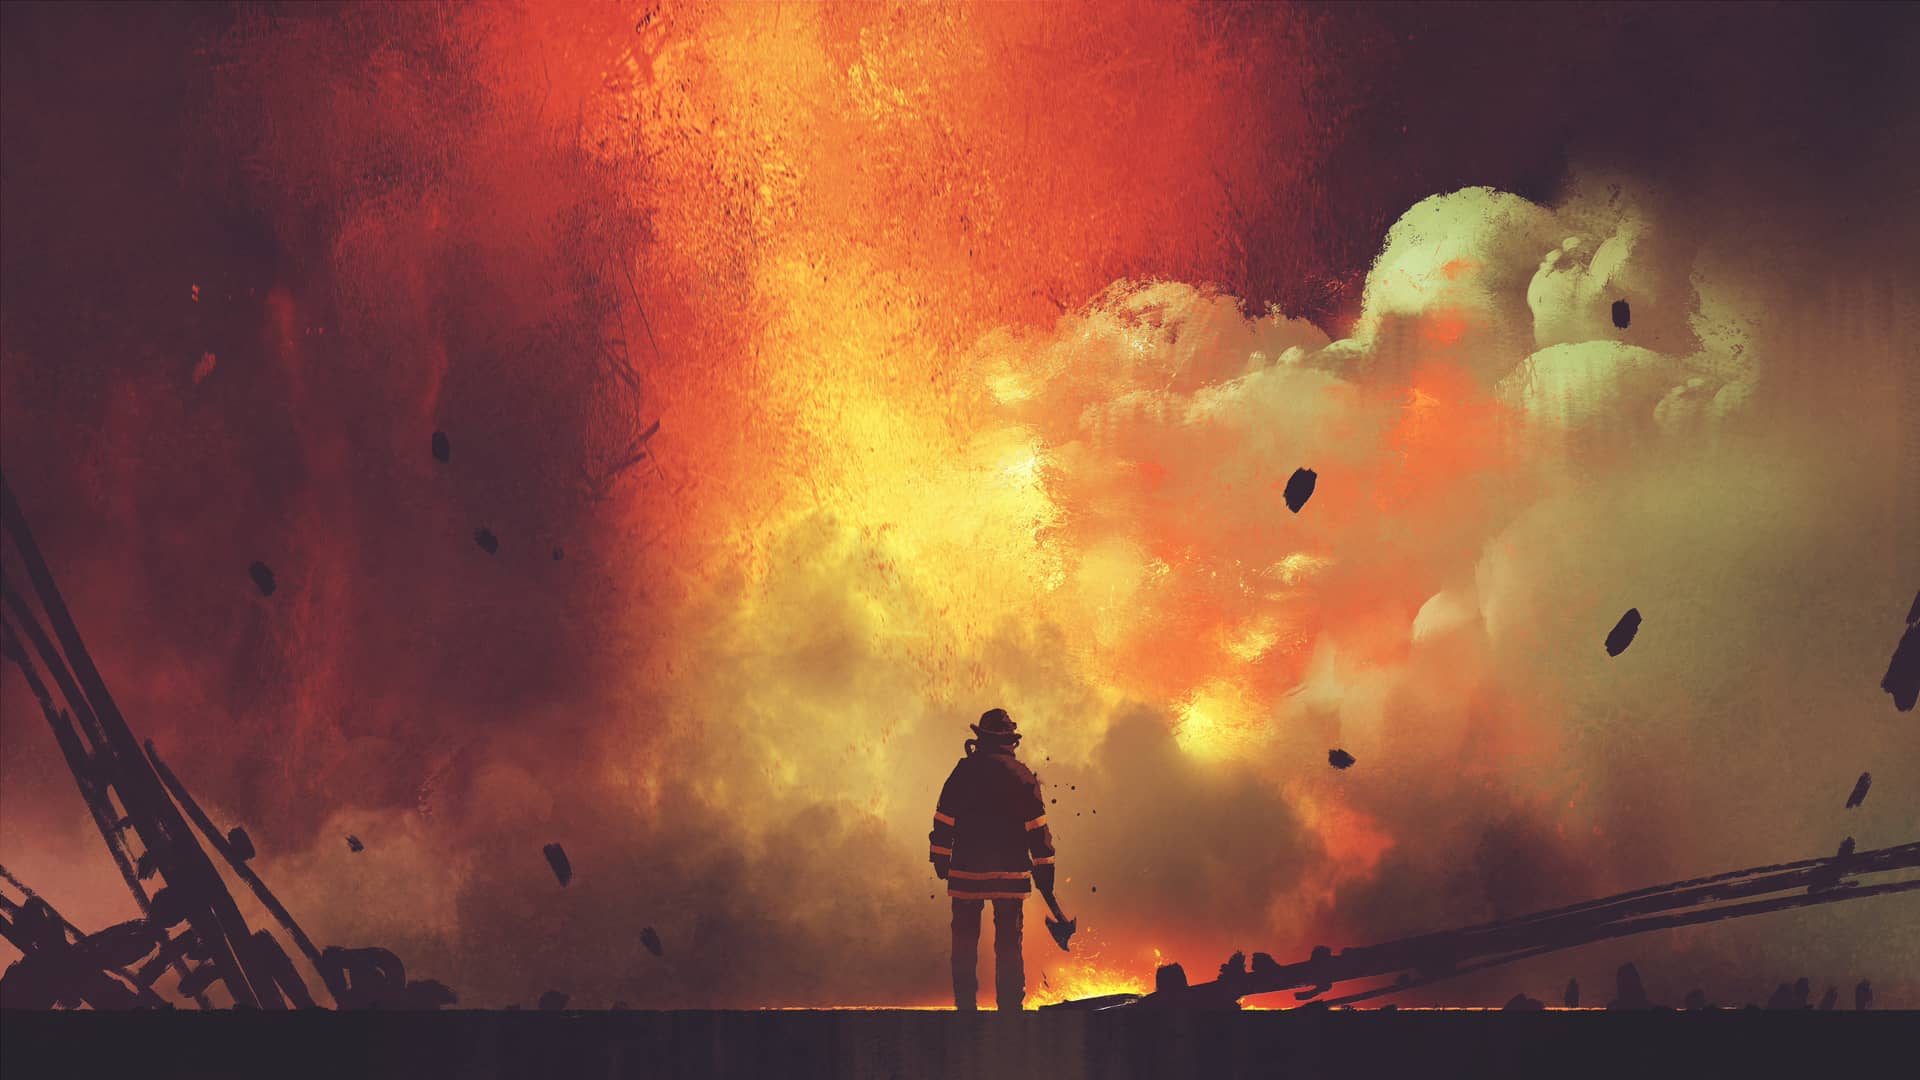 Axe standing front frightening explosion digital art style illustration painting